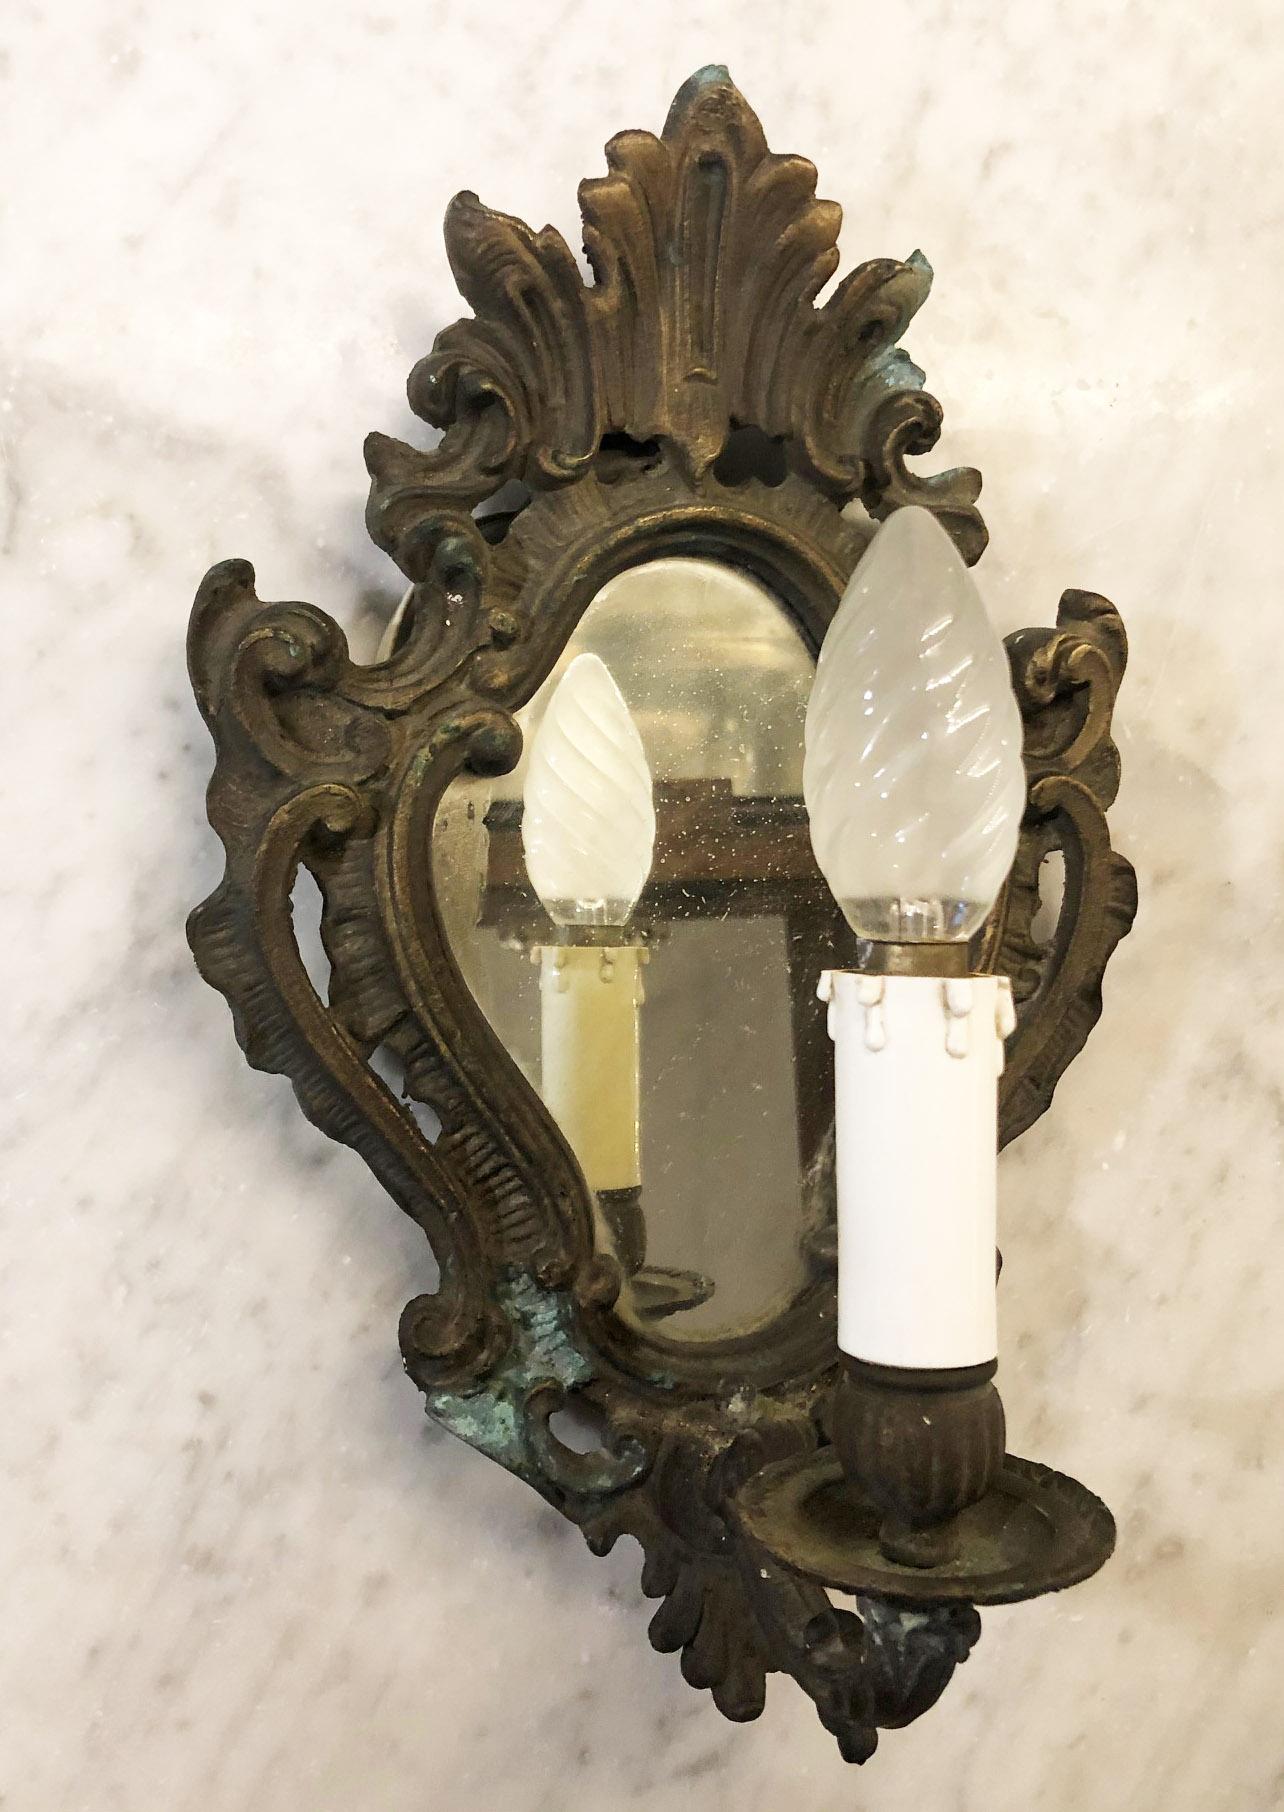 Original 1940s Italian bronze wall lamp with old mirror.
In working condition.
Equipped with original 20th century European wiring.
We recommend buyer consults an experienced electrician for proper installation.
The fixture requires one European E14